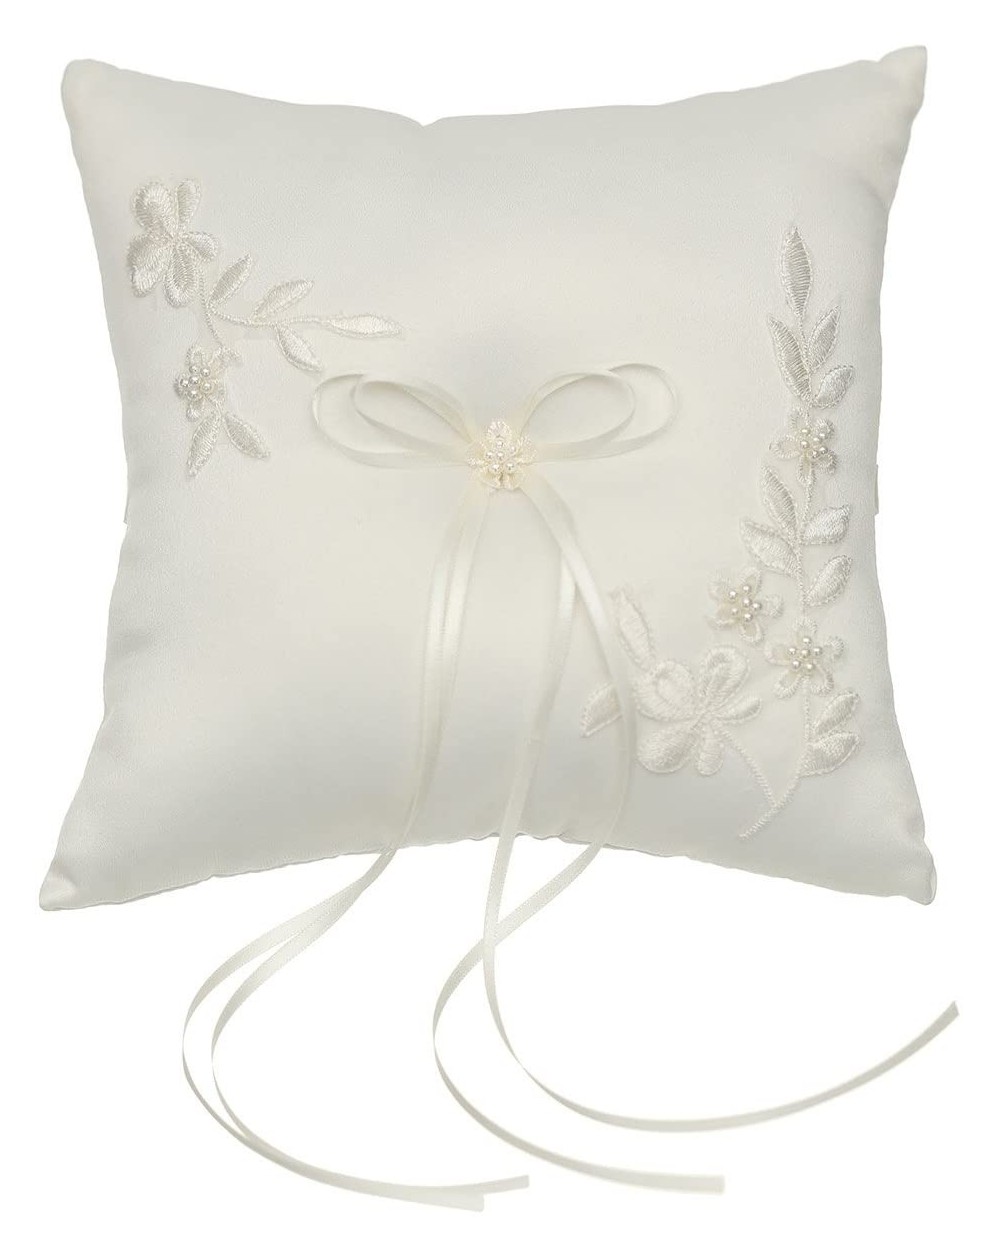 Ceremony Supplies Venus Jewelry Pearl Embroided Flower Leaves Wedding Ring Bearer Pillow 7 Inch x 7 Inch - Ivory RP010I - Ivo...